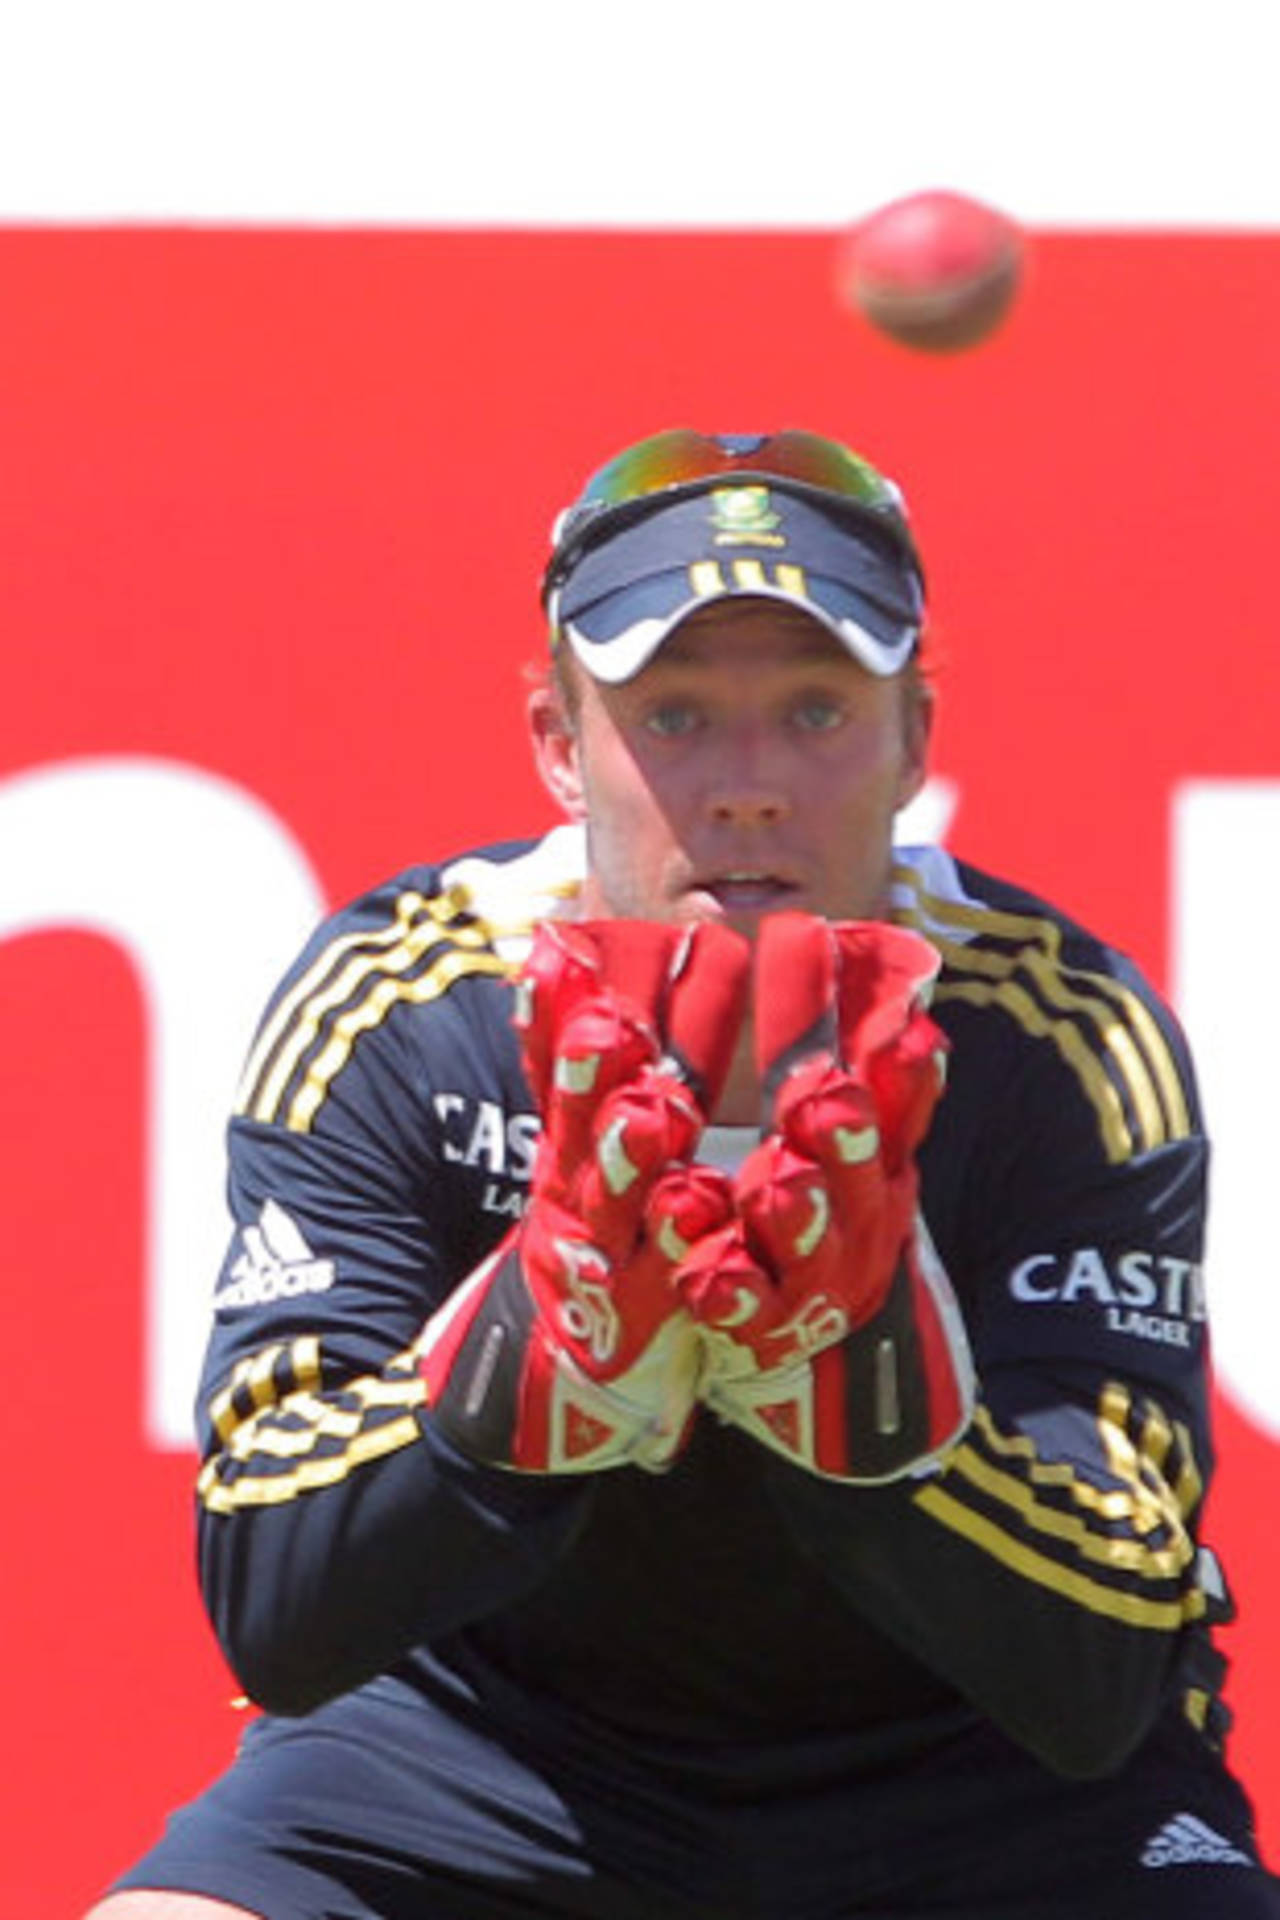 AB de Villiers says he has adapted to his new role as wicketkeeper-batsman&nbsp;&nbsp;&bull;&nbsp;&nbsp;Gallo Images